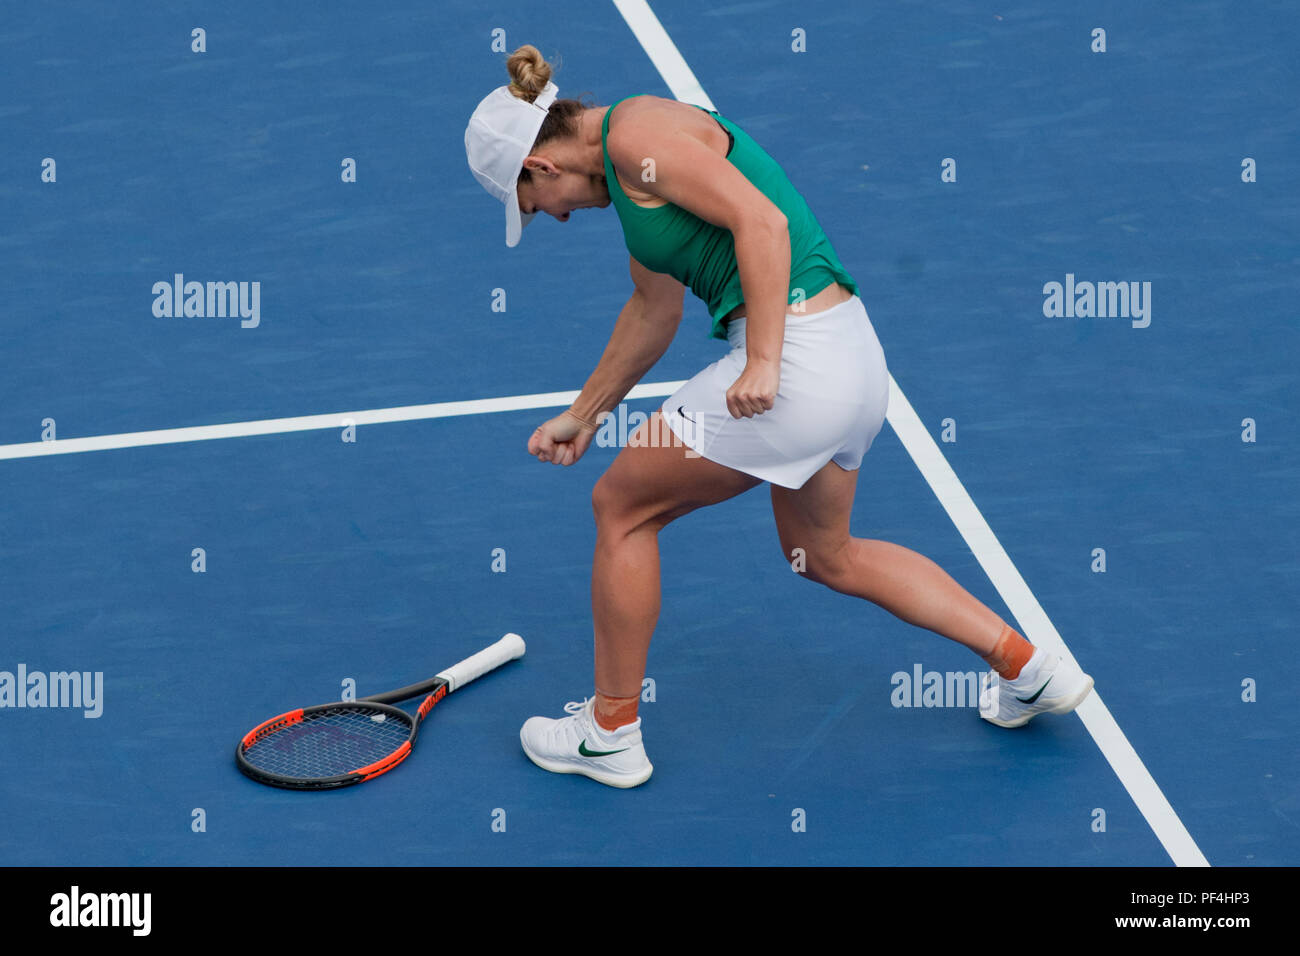 Cincinnati, OH, USA. 18th Aug, 2018. Western and Southern Open Tennis,  Cincinnati, OH - August 18, 2018 - Simona Halep in action against Aryna  Sabalenka in the semi finals of the Western